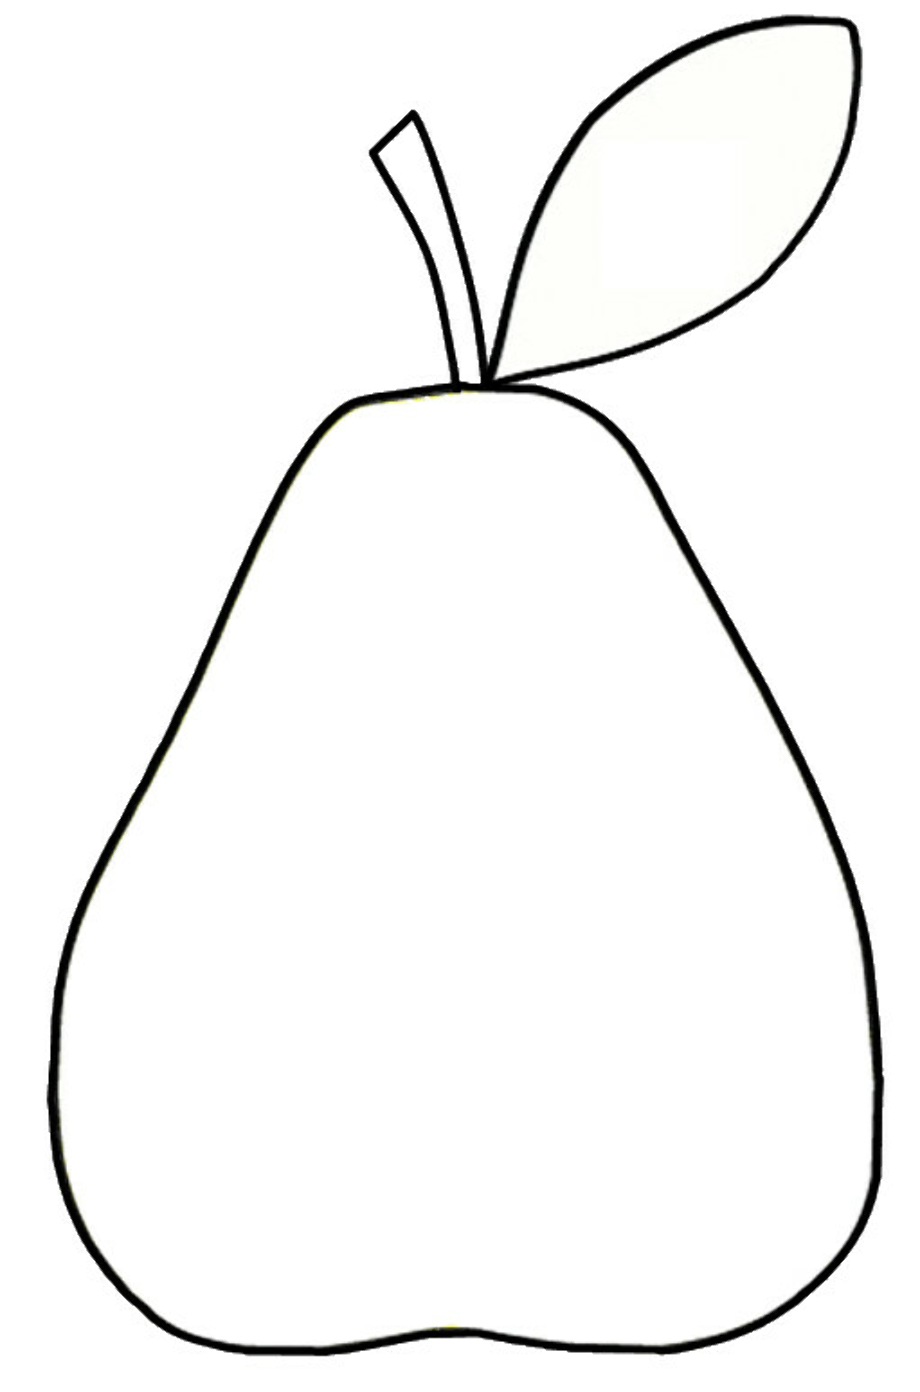 pear clipart drawing